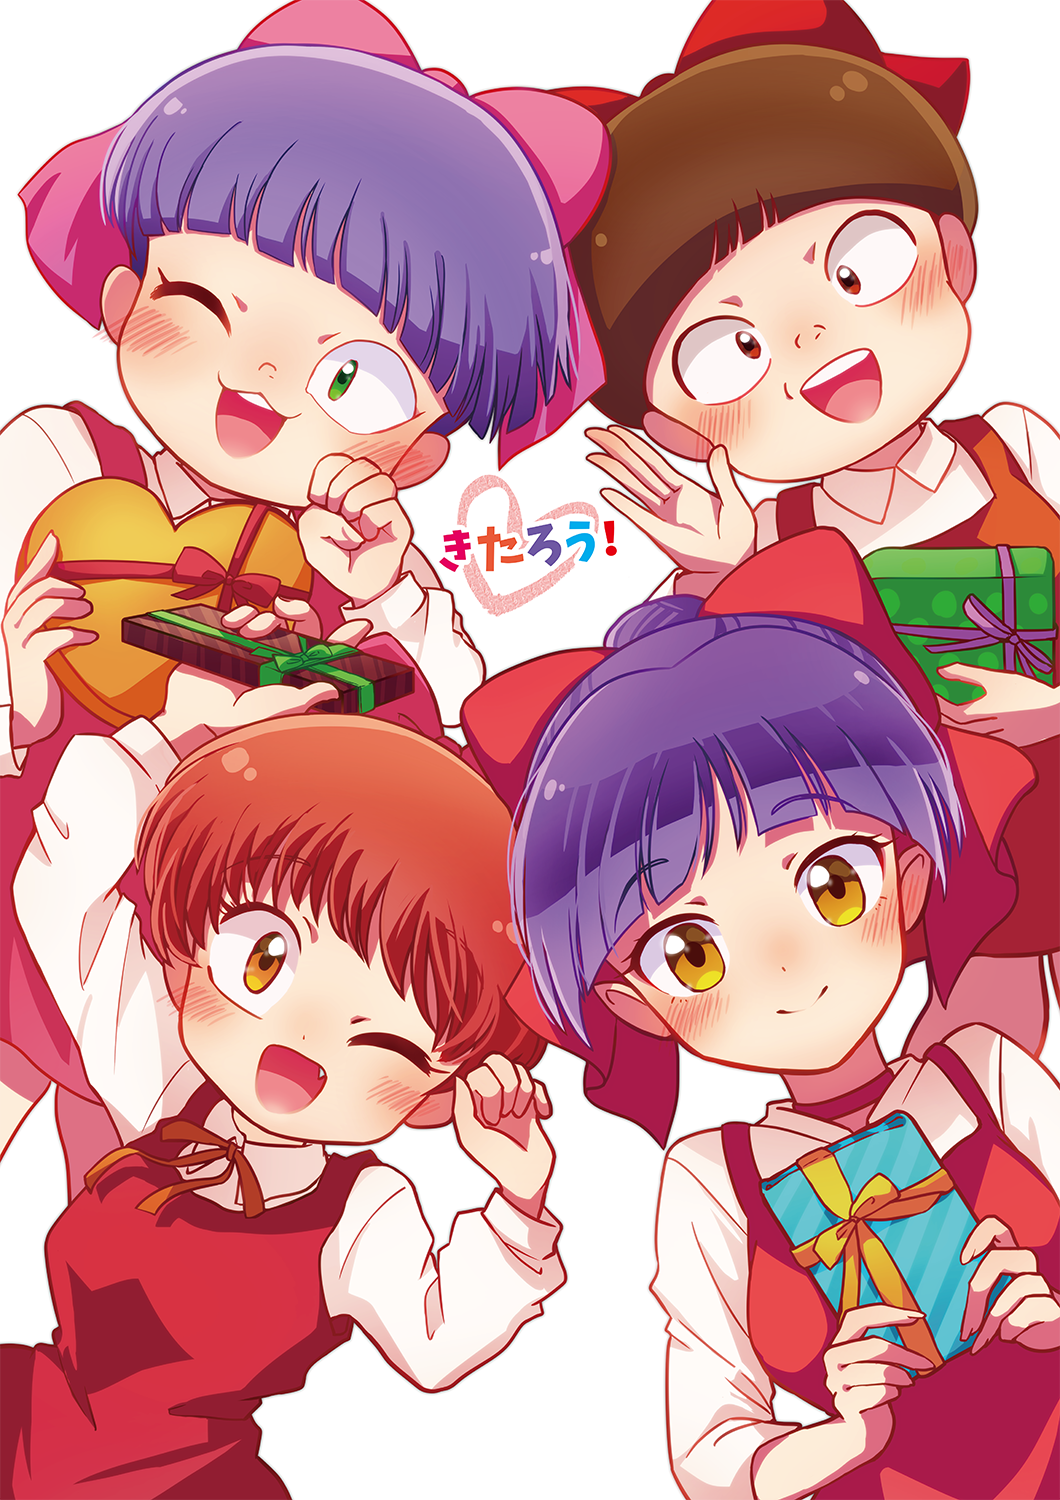 4girls ;d bangs blush bow brown_hair choker closed_mouth commentary_request eyebrows_visible_through_hair fang gegege_no_kitarou gift green_eyes hair_bow highres himeno_ktnk holding holding_gift long_sleeves looking_at_viewer multiple_girls nekomusume nekomusume_(gegege_no_kitarou_3) nekomusume_(gegege_no_kitarou_4) nekomusume_(gegege_no_kitarou_5) nekomusume_(gegege_no_kitarou_6) one_eye_closed open_mouth pink_bow purple_hair red_bow red_choker red_eyes red_hair short_hair simple_background smile valentine white_background yellow_eyes